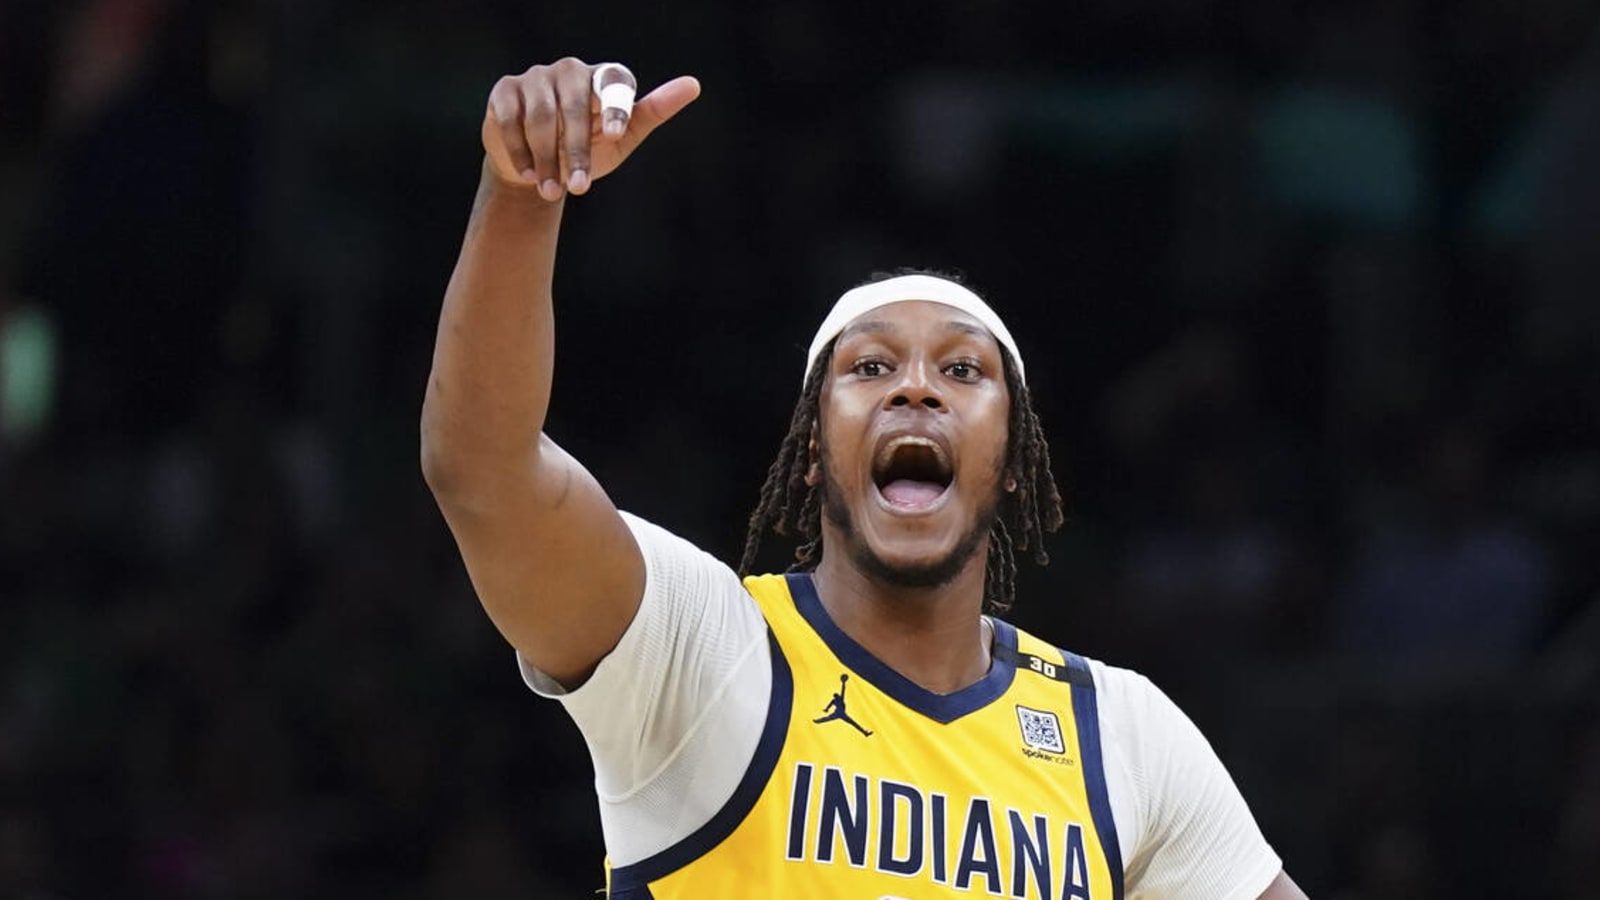 Watch: Pacers' Turner has scoring explosion in first half